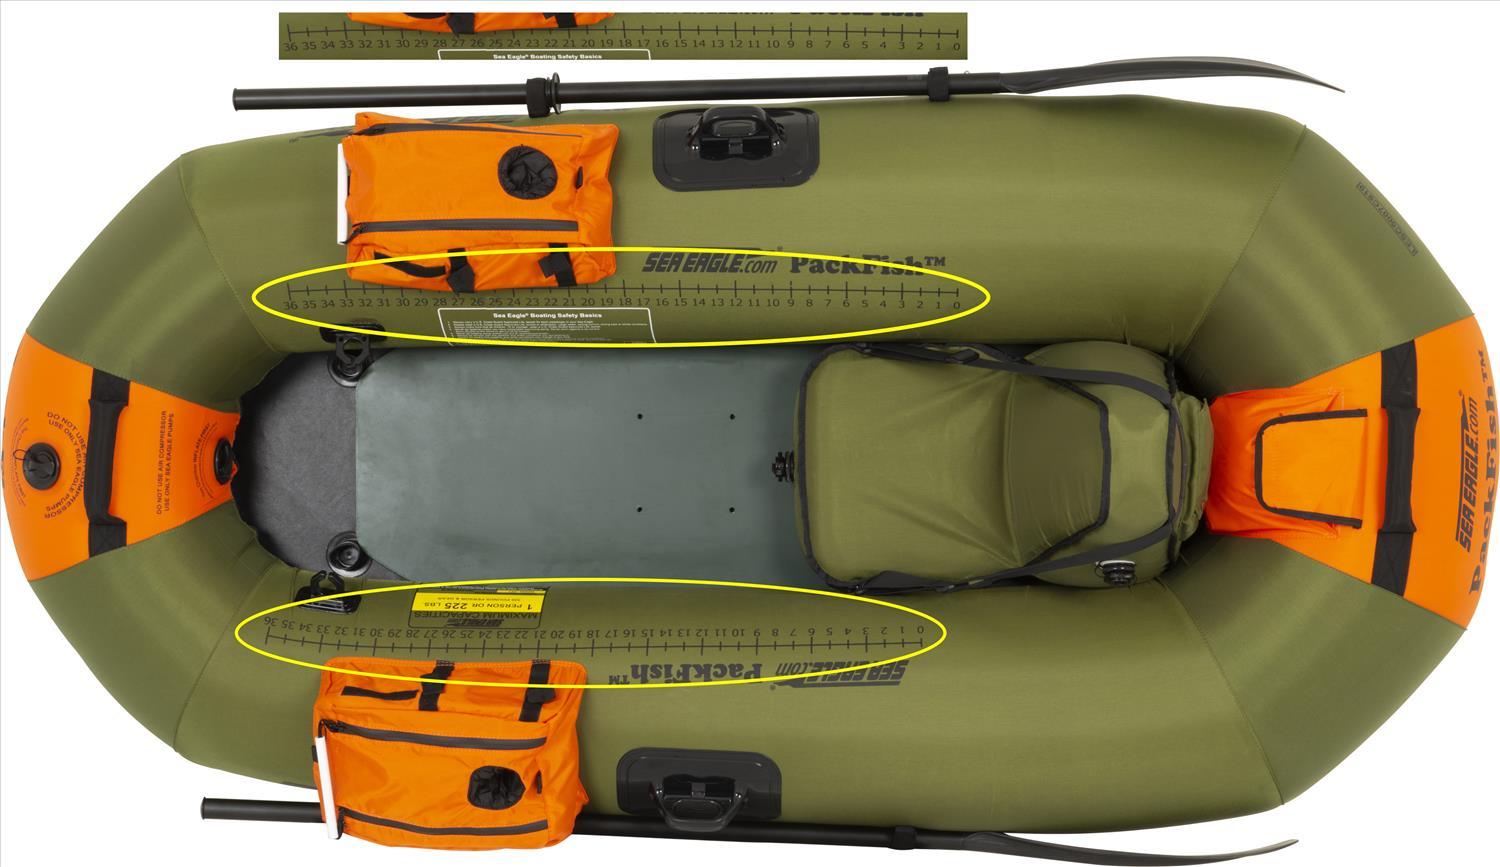 Sea Eagle, Sea Eagle PackFish 7 Inflatable Boat Deluxe Fishing Package Green Orange New